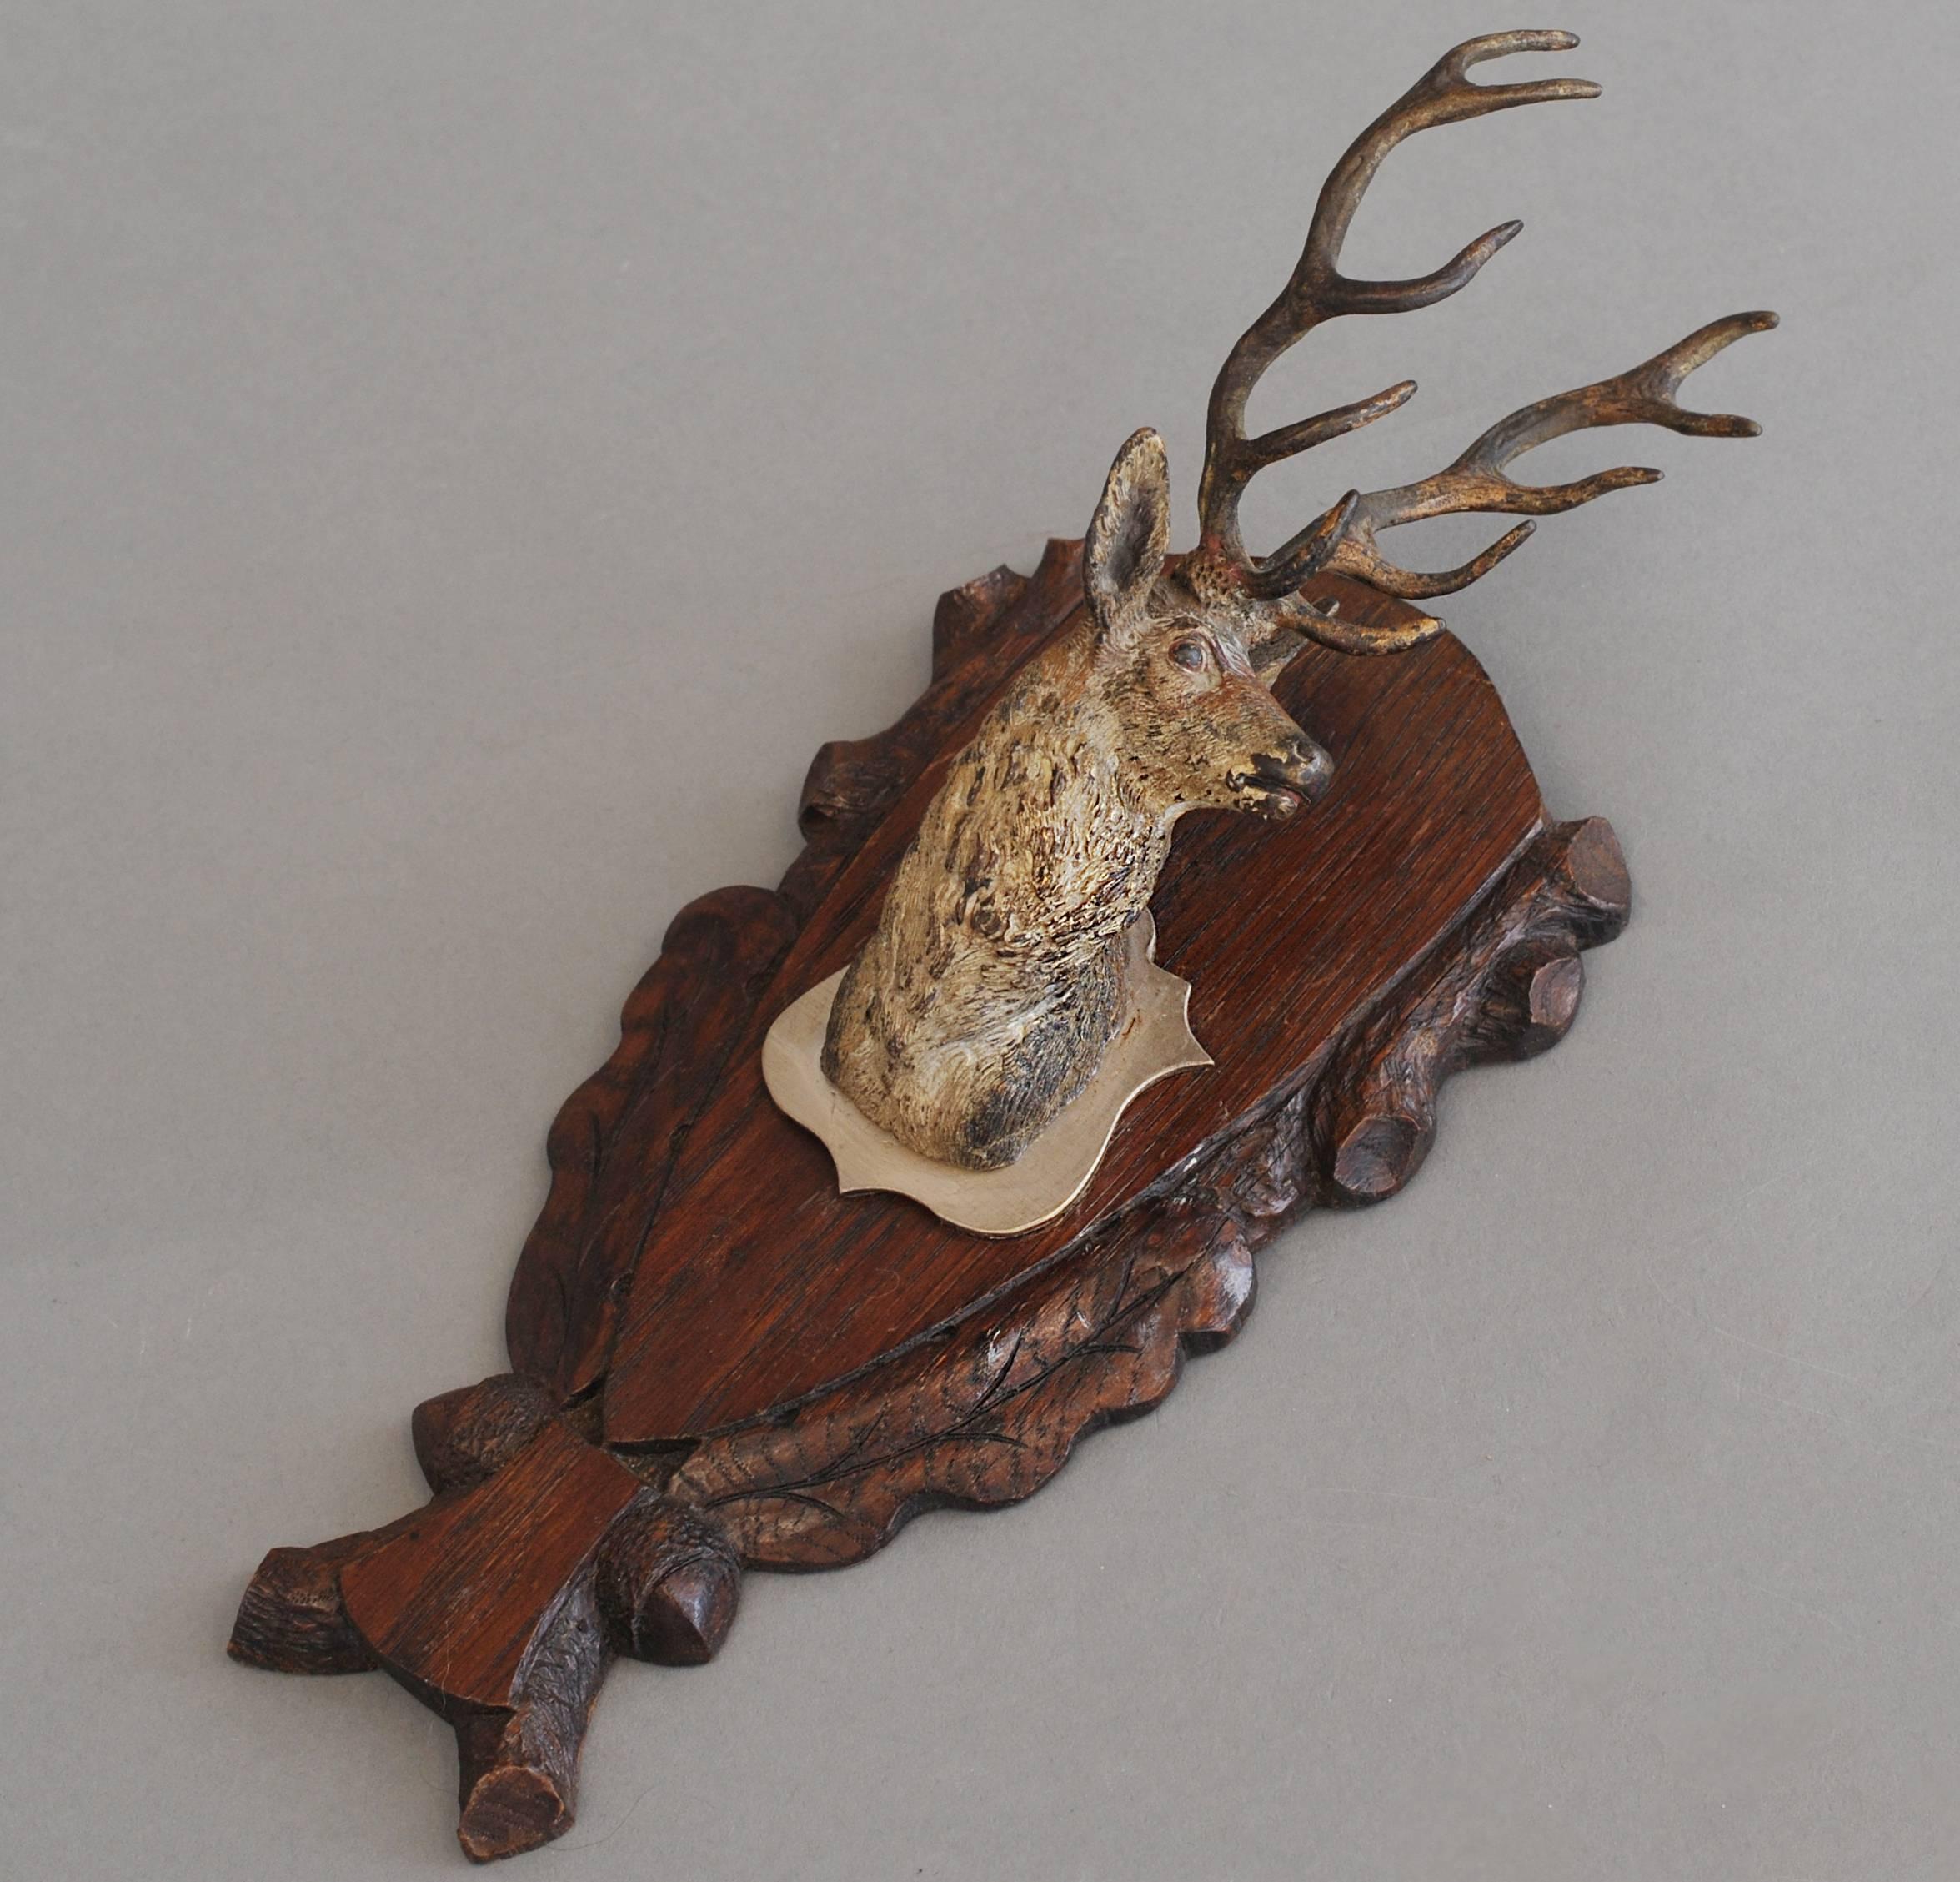 A nice head of a stag or a deer Vienna bronze, circa 1900. Probably used as a hunting trophy mounted on a wooden wall bracket.